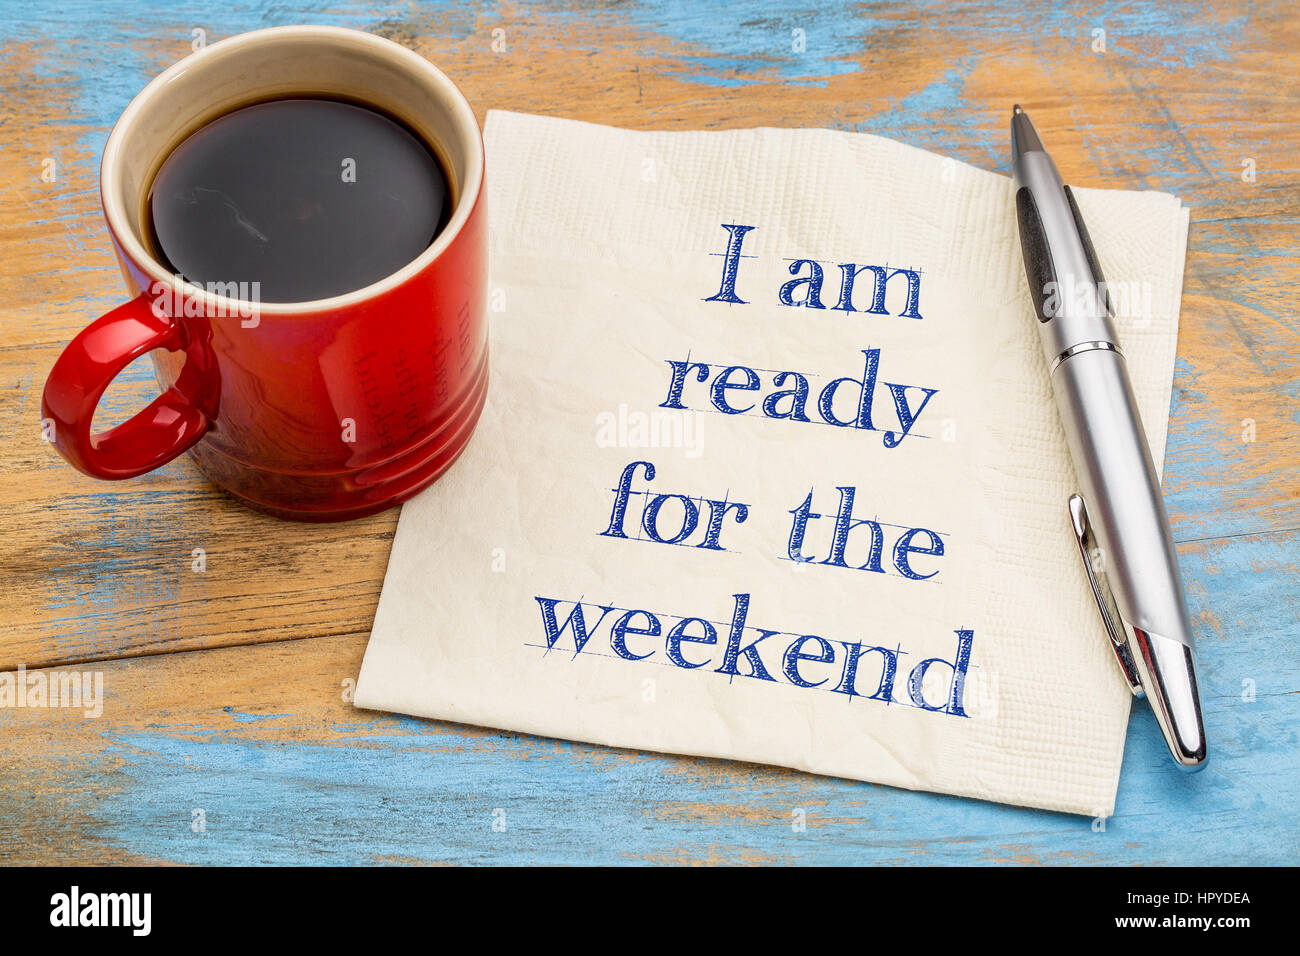 I am ready for the weekend - handwriting on a napkin with a cup of espresso coffee Stock Photo